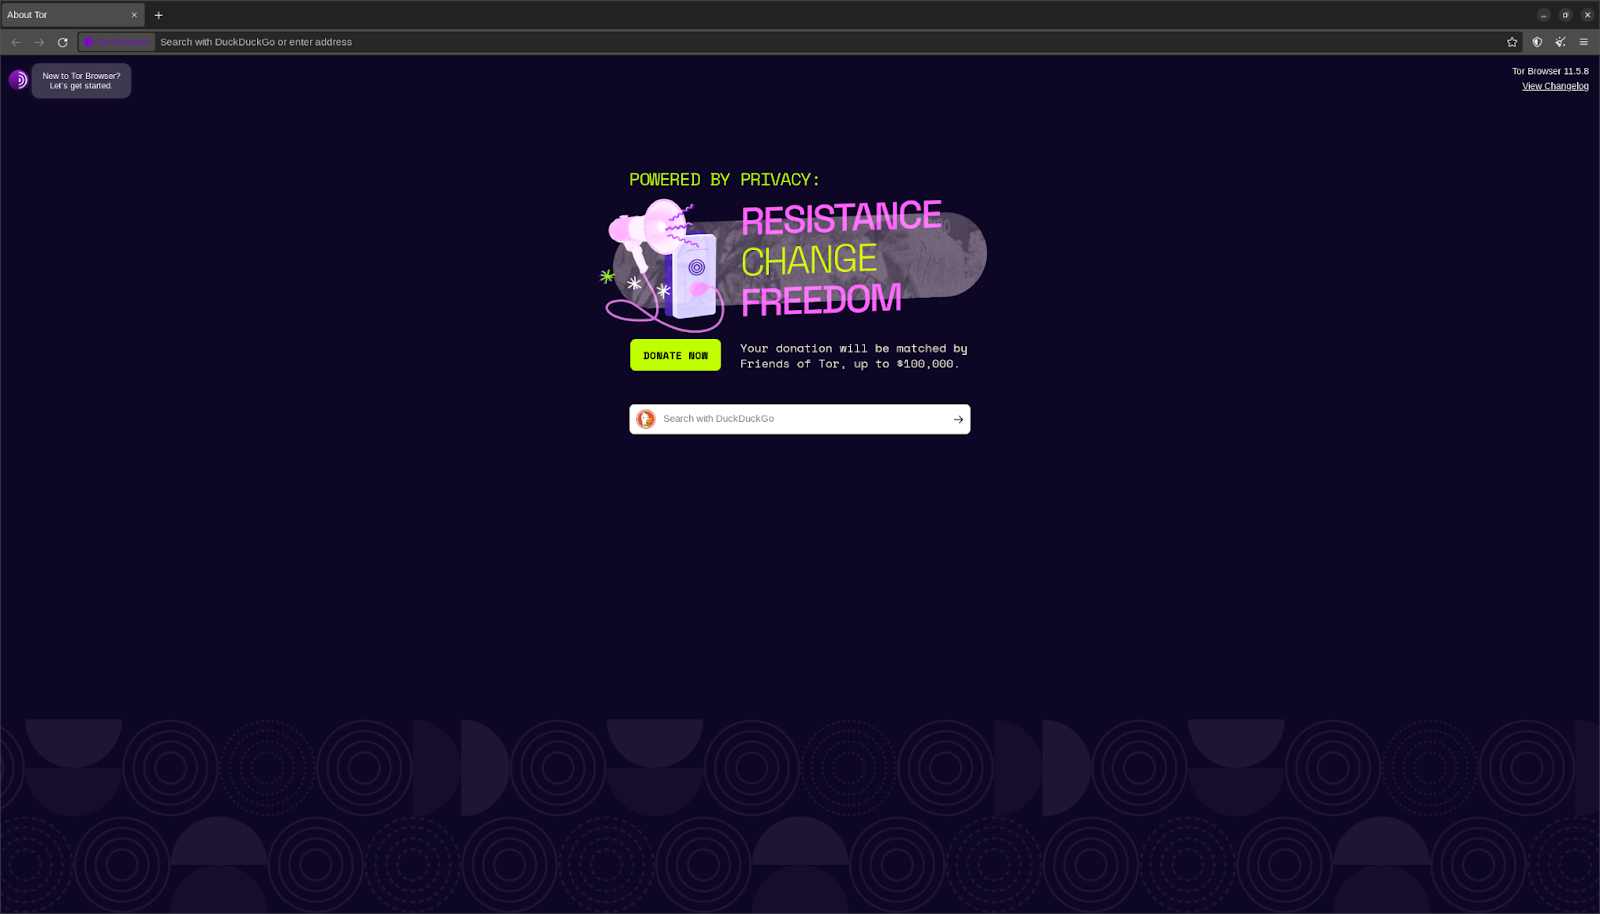 The homepage of the TOR browser has a dark navy-black background with a graphic in the middle of a megaphone with the text “Resistance Change Freedom” next to it.